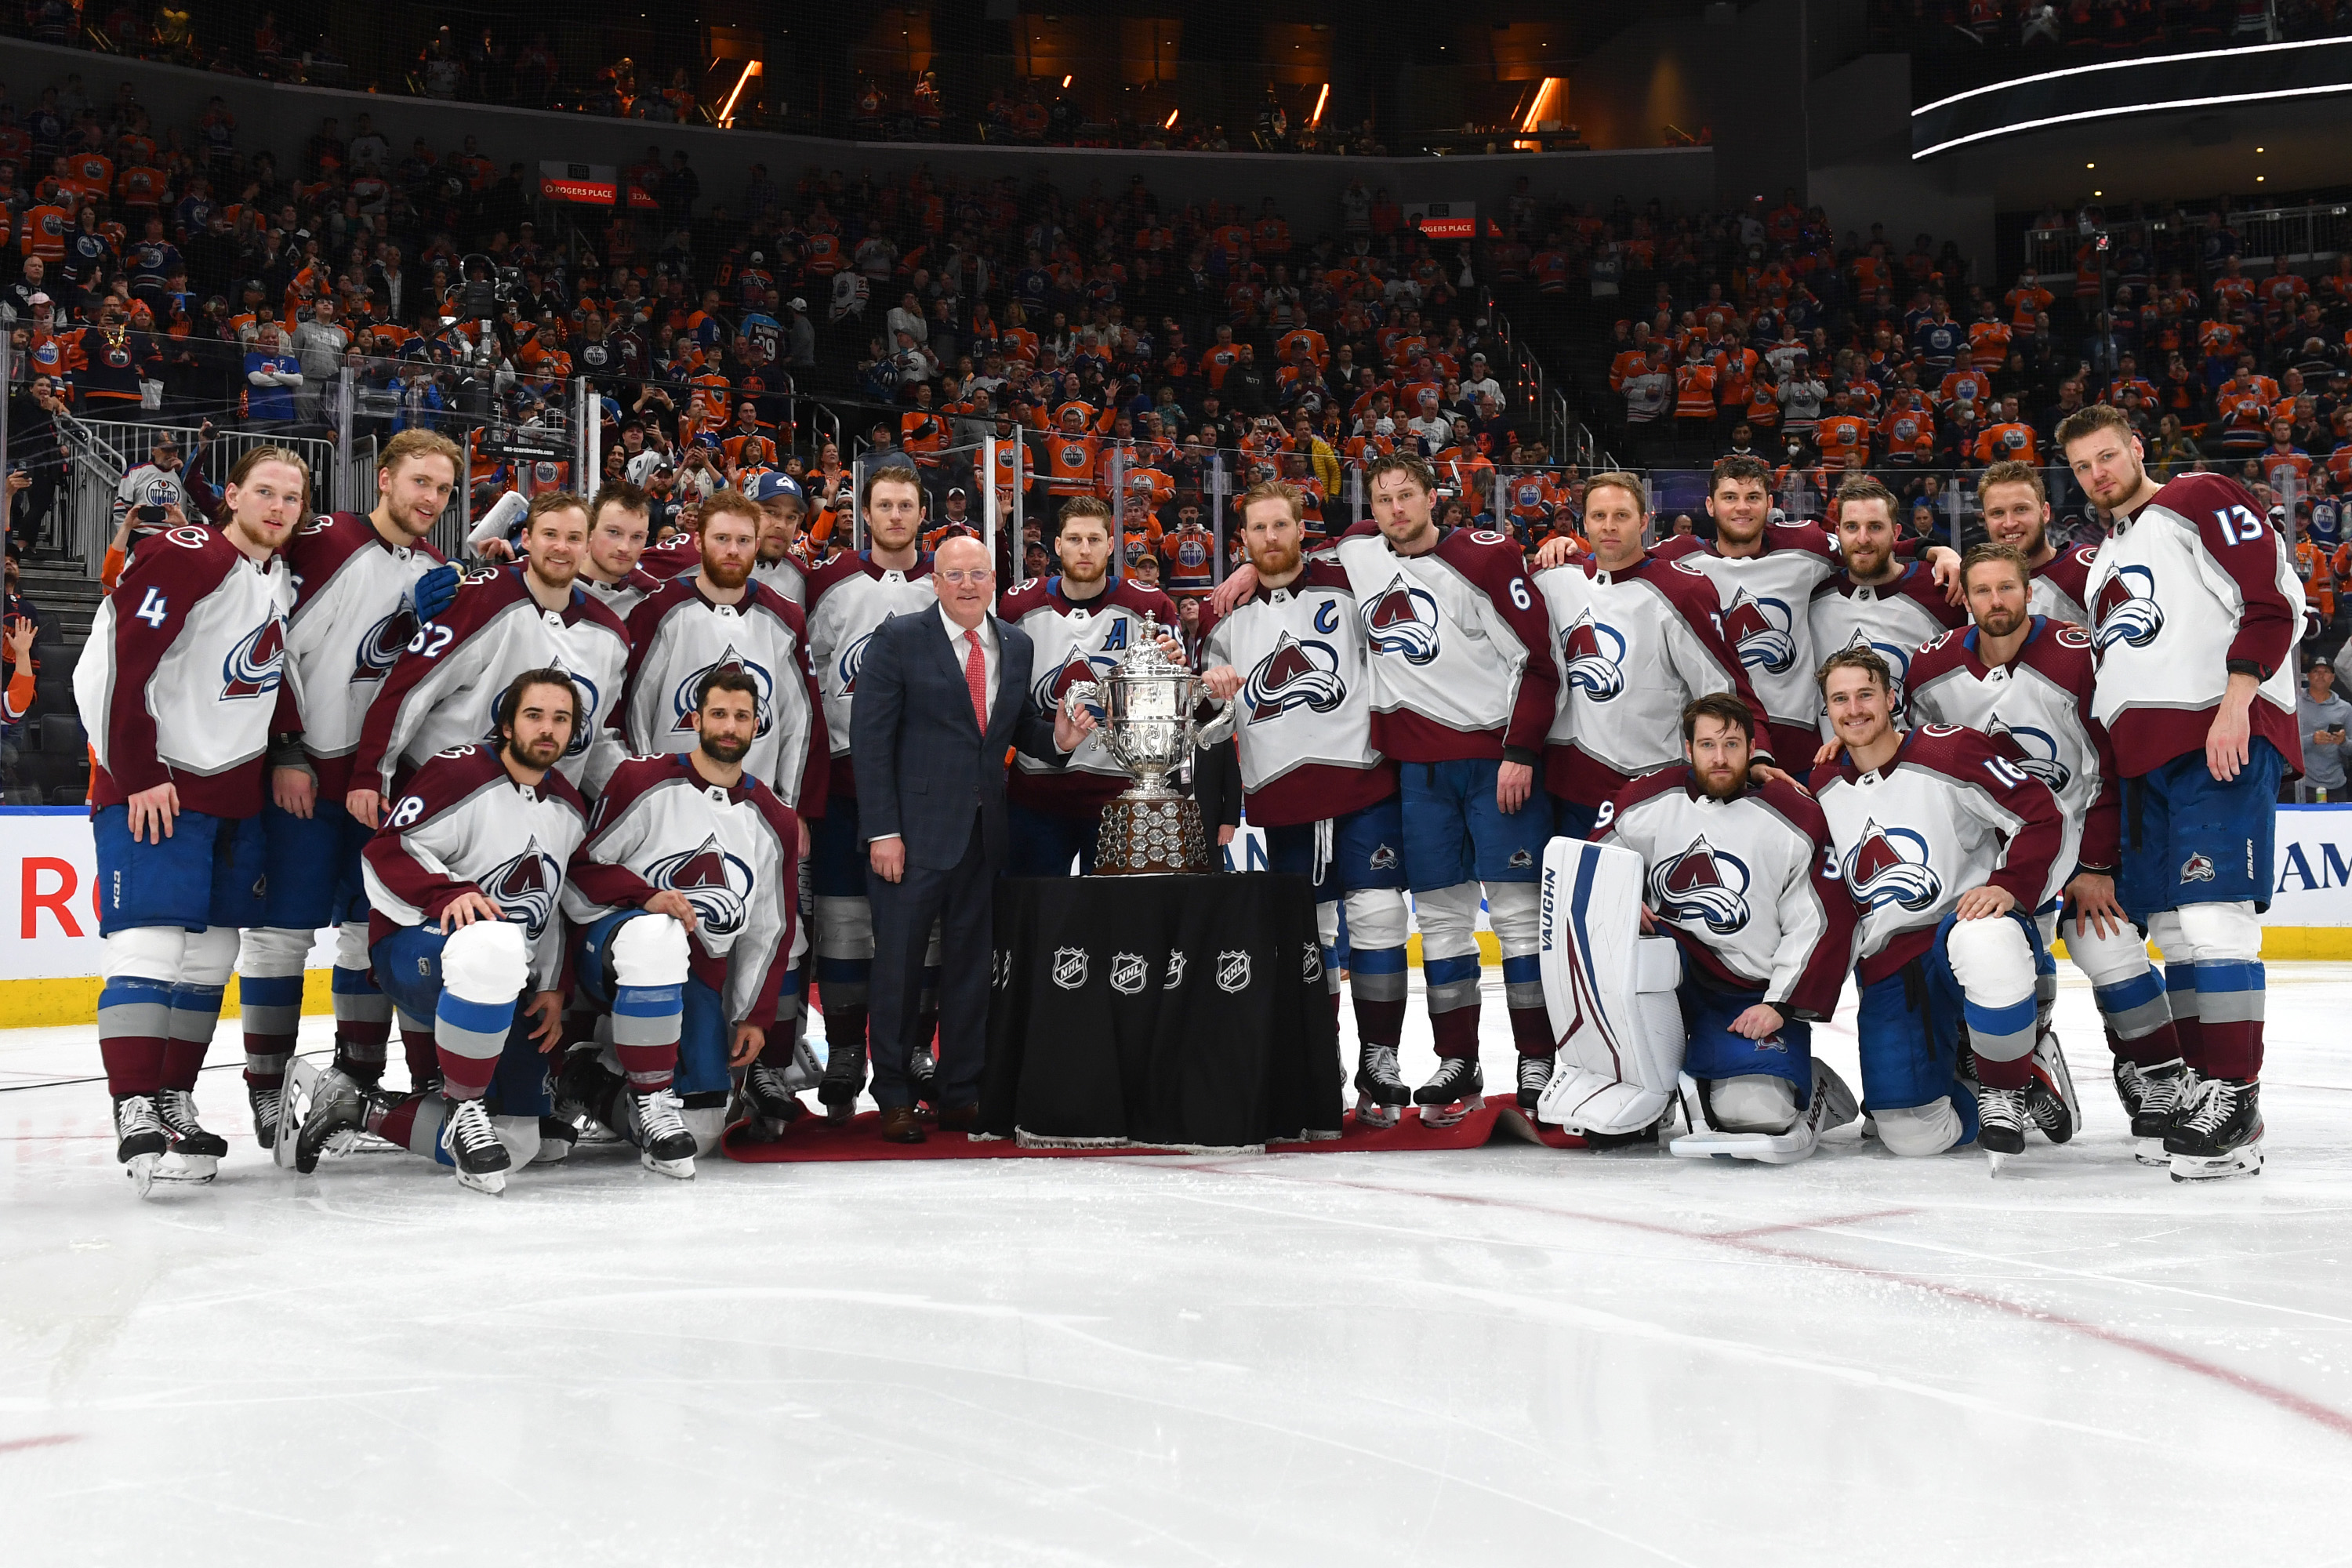 Players of the Colorado Avalanche pose with Bill Daly and the Clarence S. Campbell Bowl after winning Game Four of the Western Conference Finals of the 2022 Stanley Cup Playoffs against the Edmonton Oilers on June 6, 2022 at Rogers Place in Edmonton, Alberta, Canada.